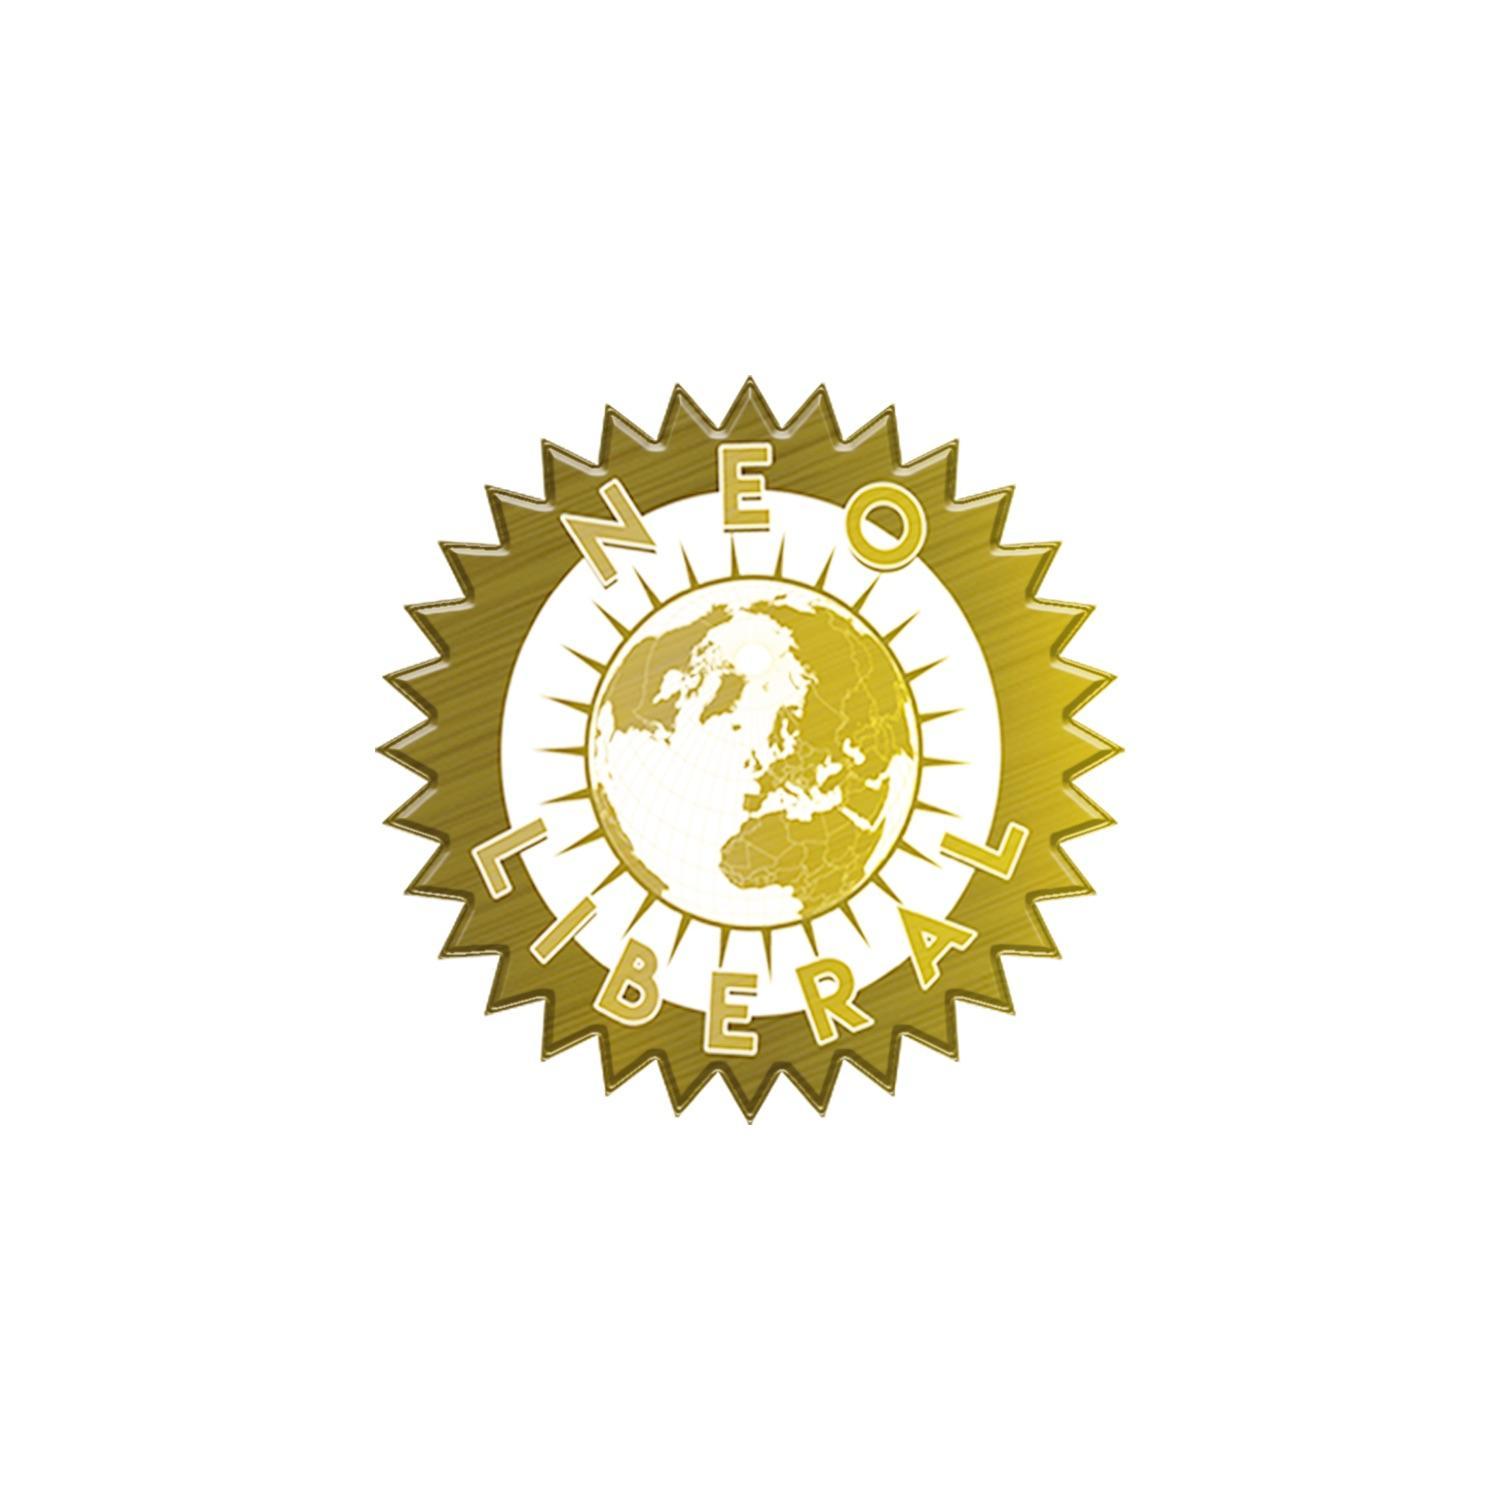 Cool Gold Logo - Made a gold edit of the logo, pretty simple but I thought it was ...